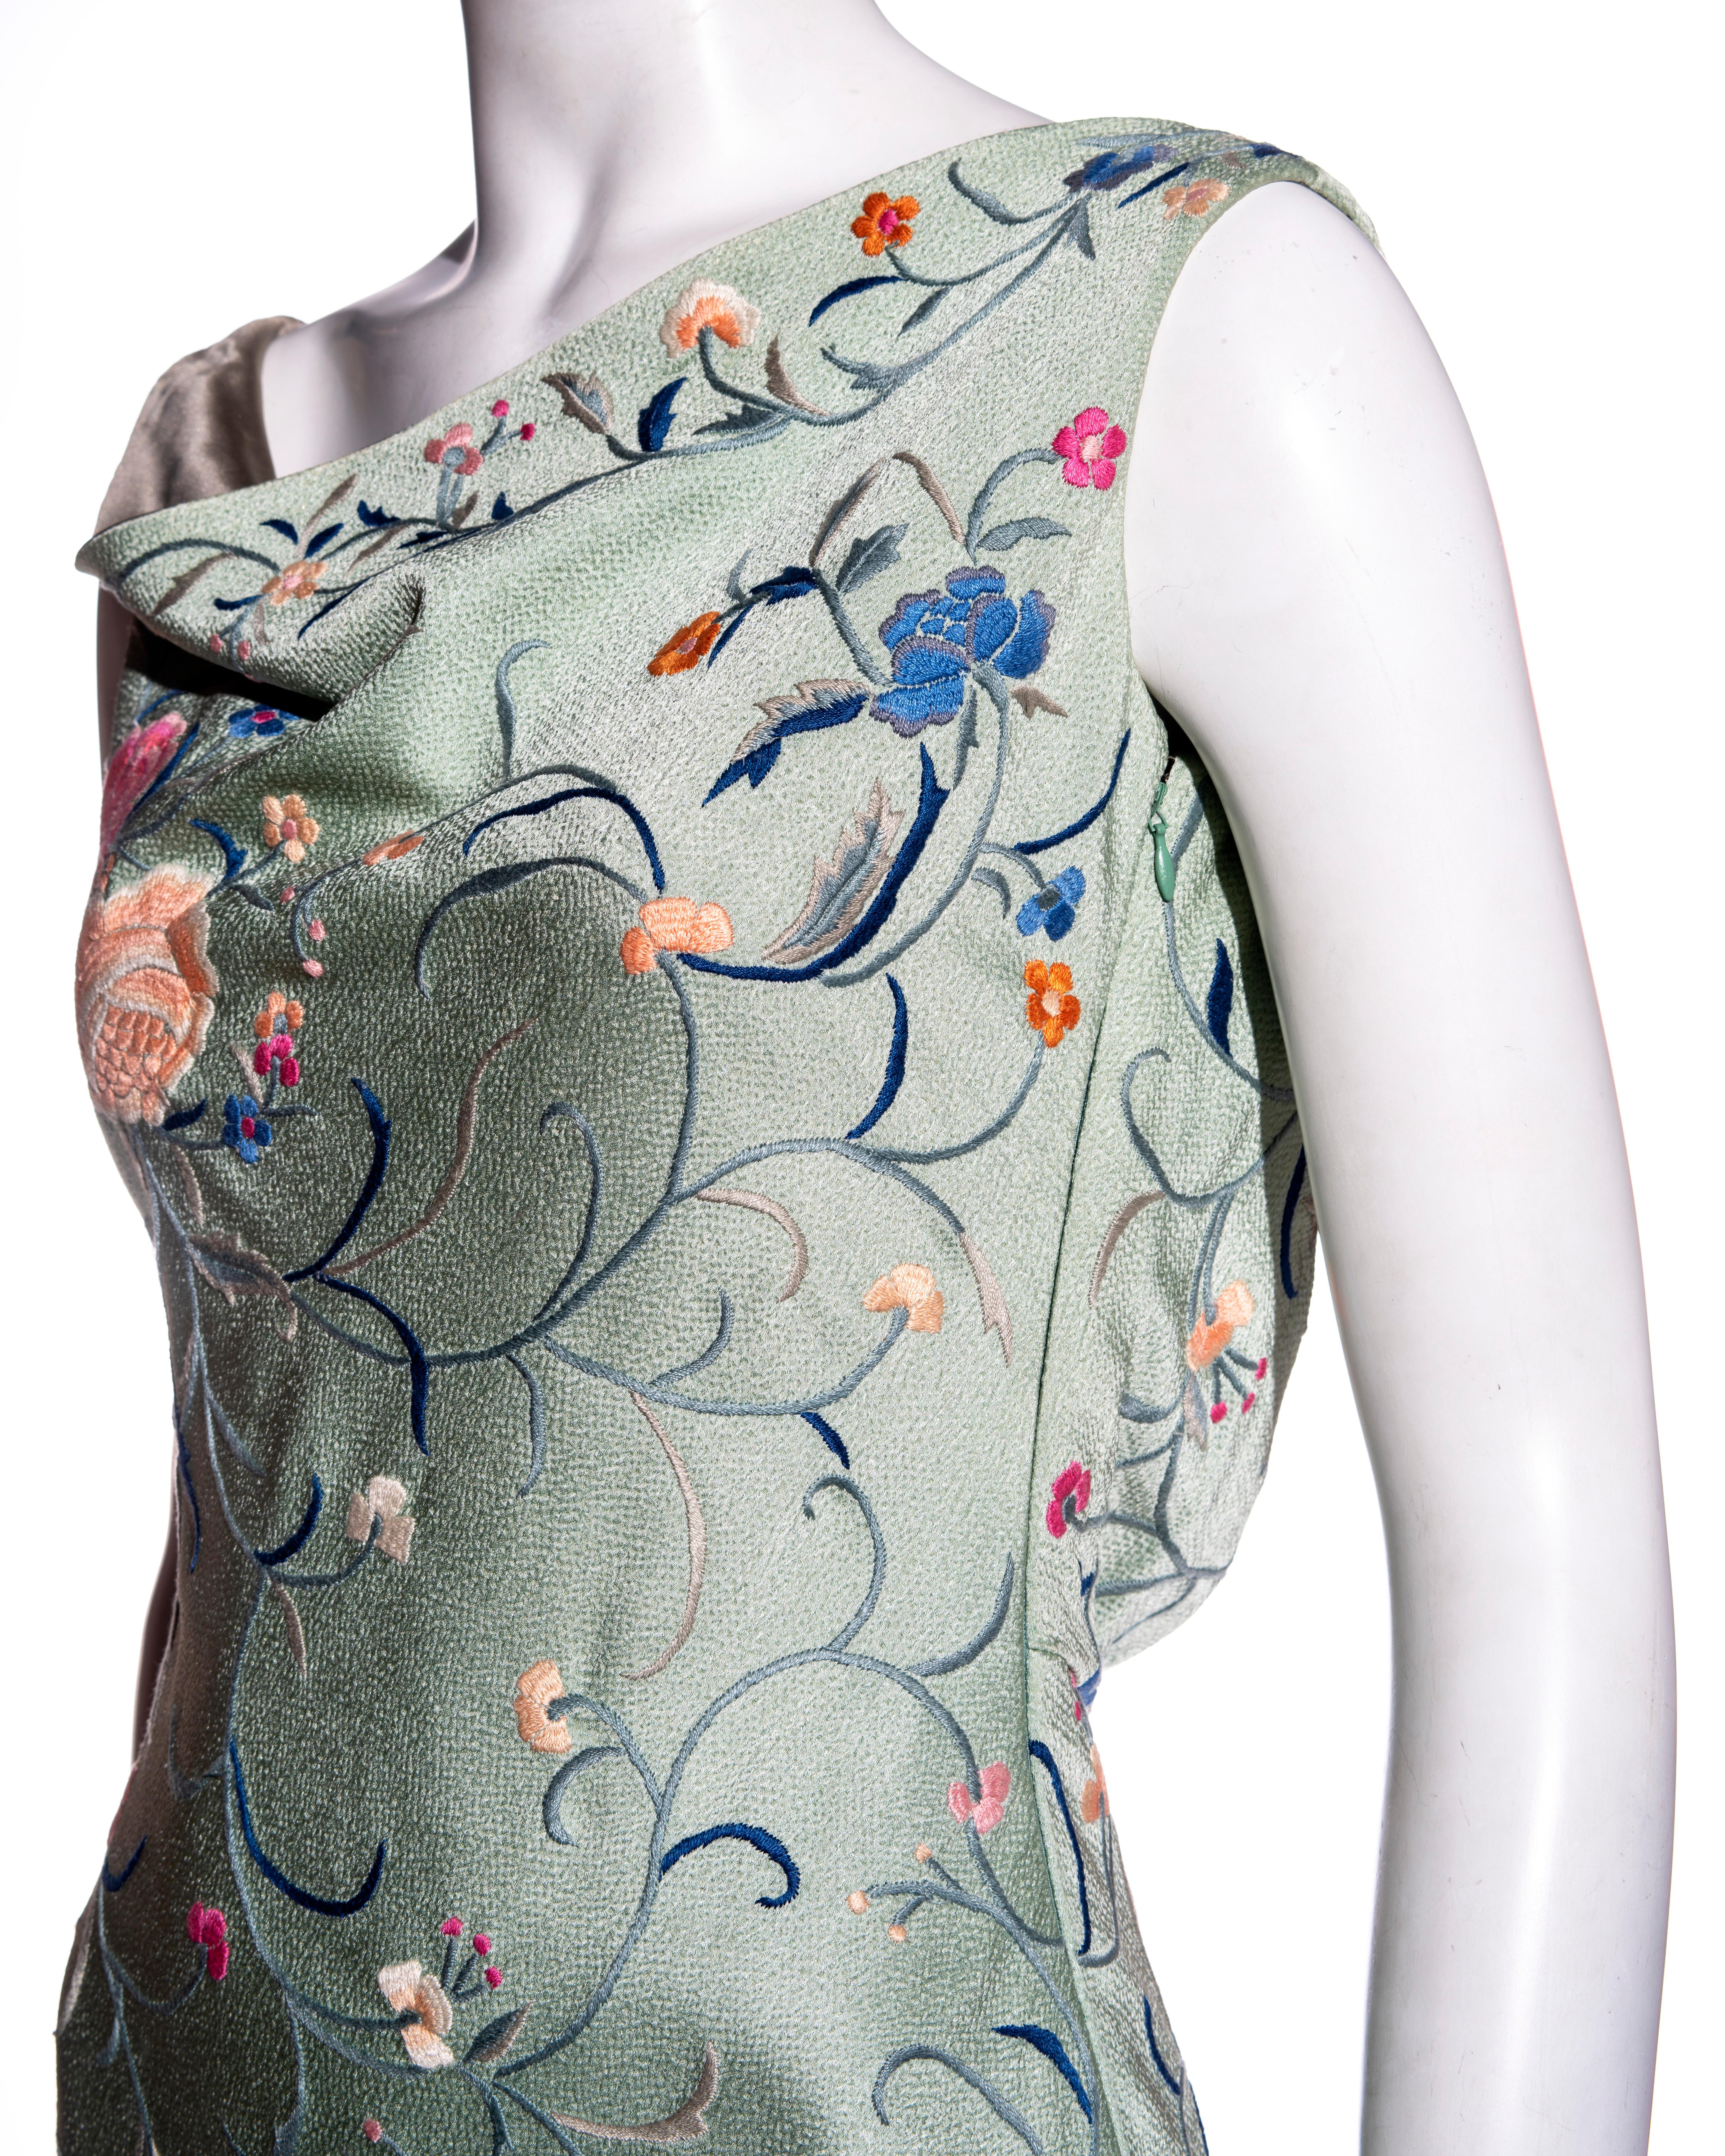 Christian Dior by John Galliano floral embroidered silk evening dress, fw 1997 For Sale 7